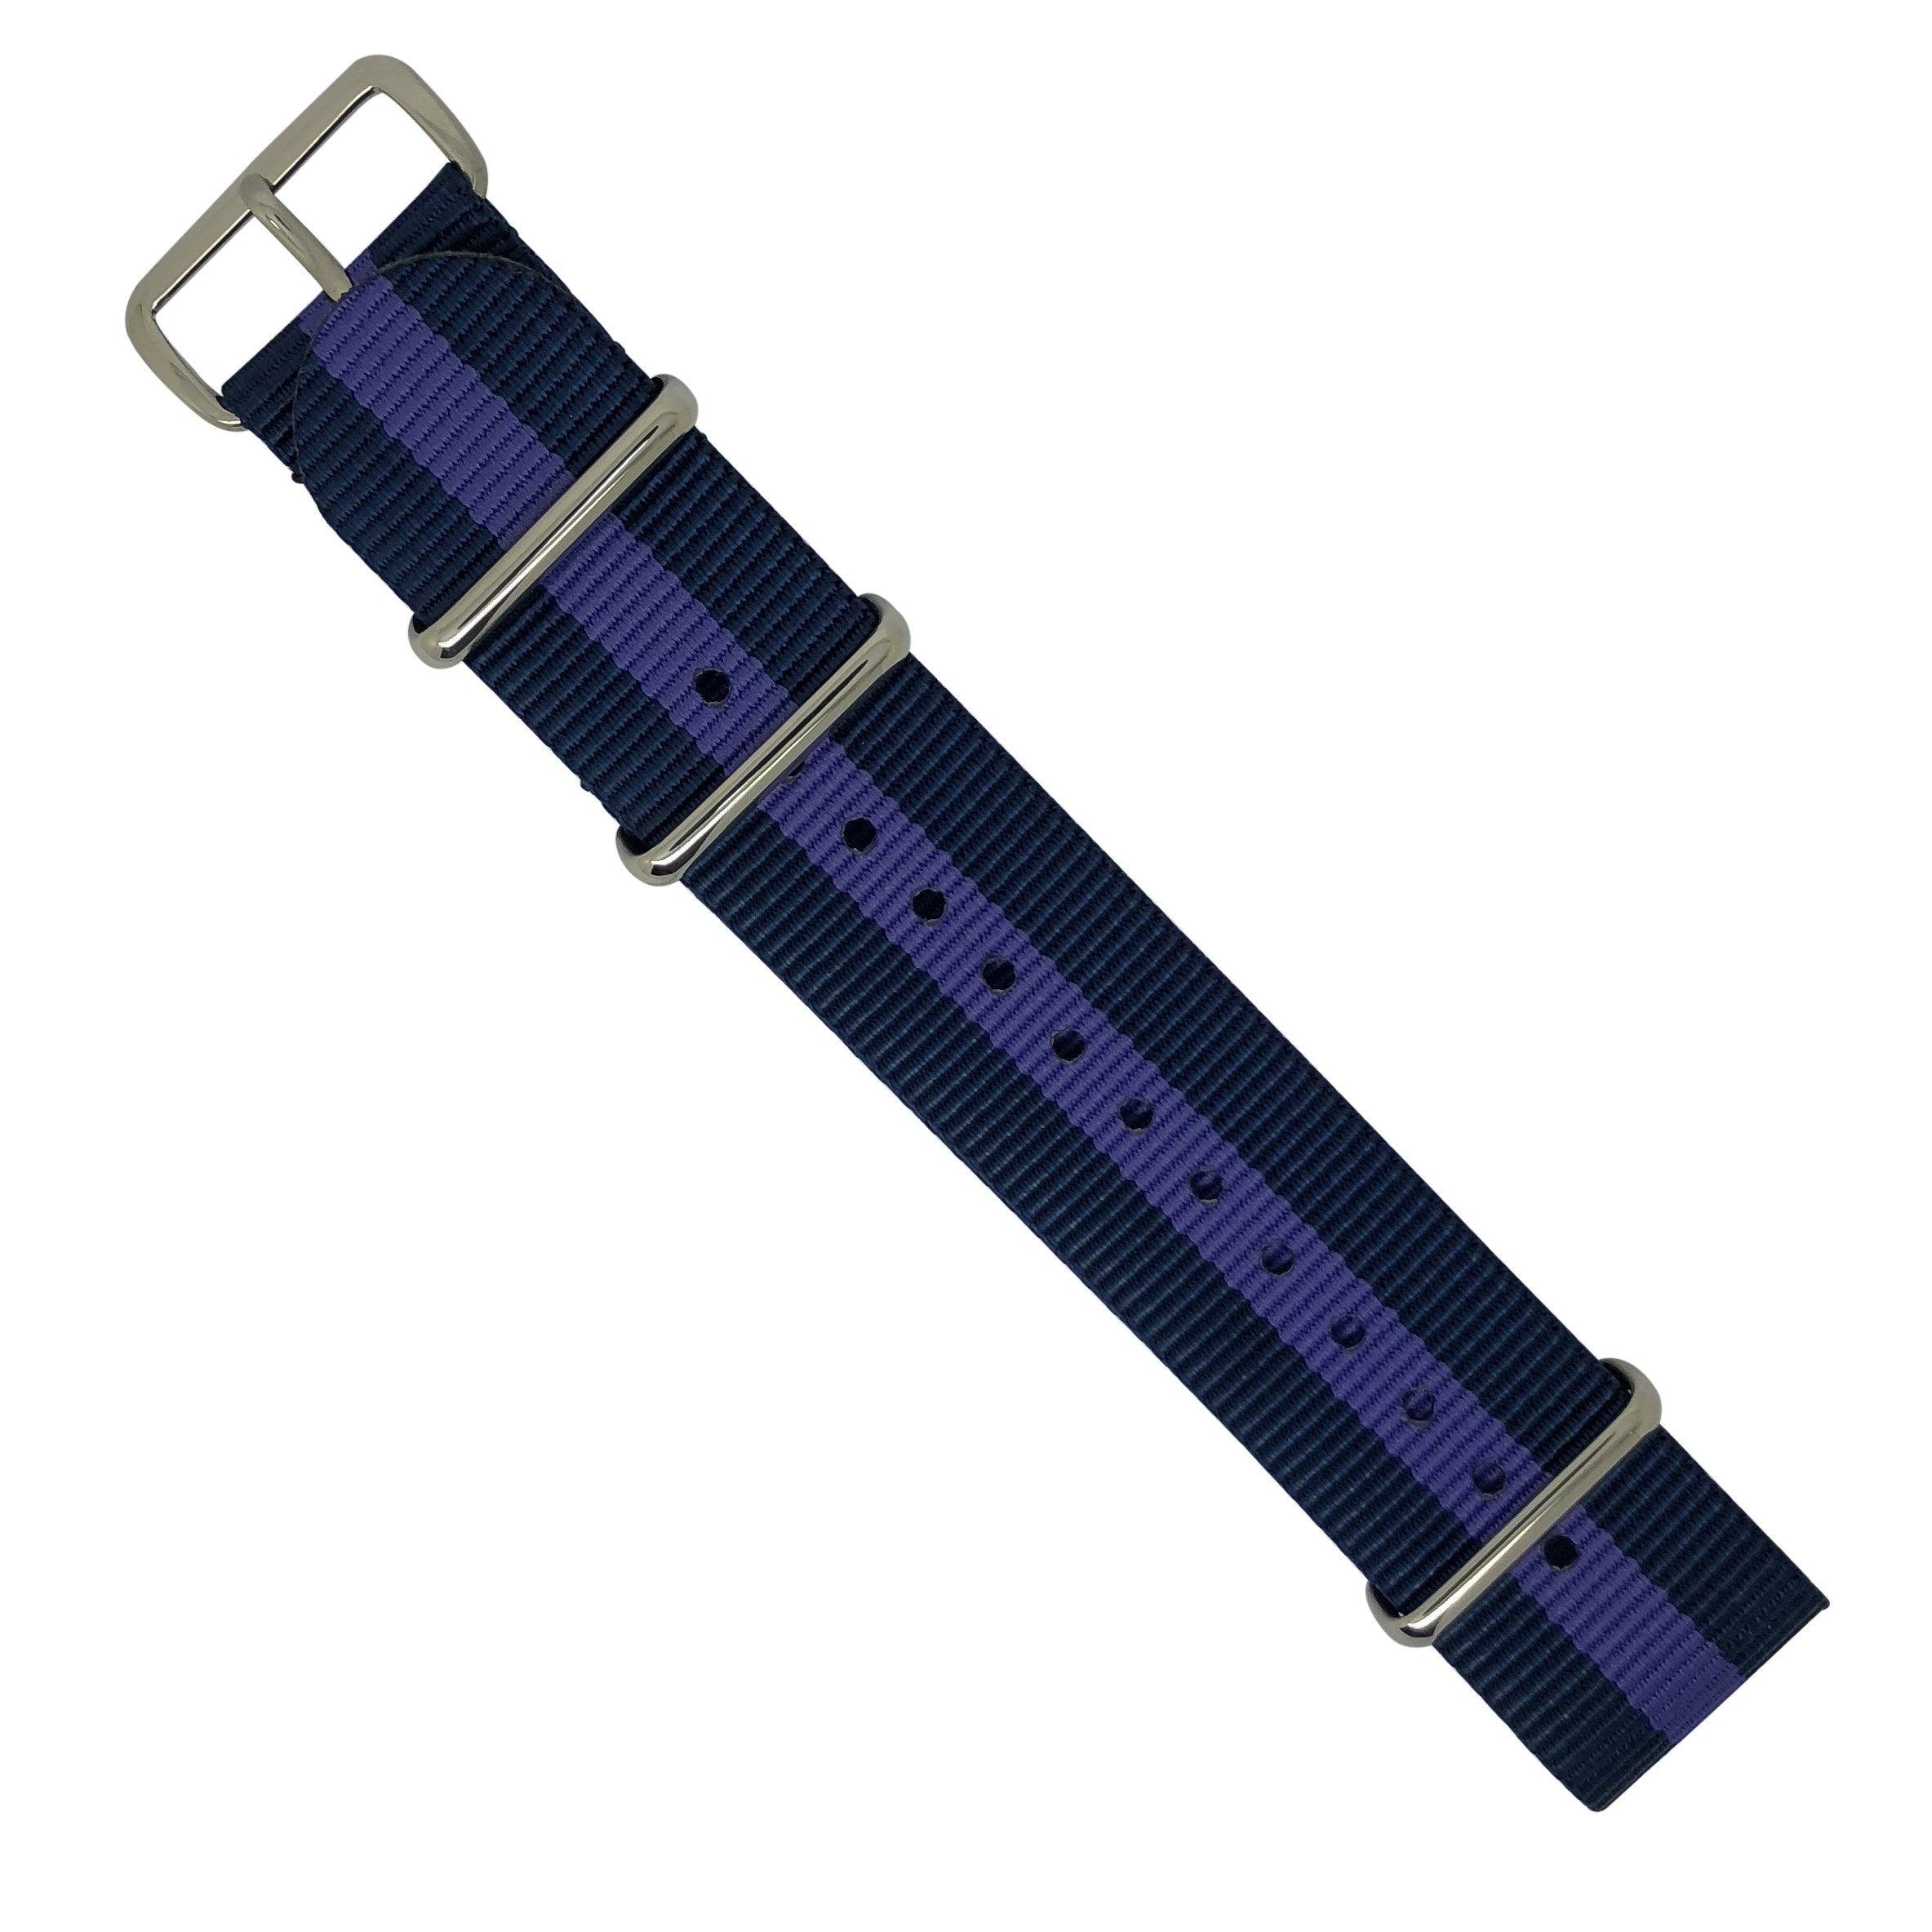 Premium Nato Strap in Navy Purple with Polished Silver Buckle (22mm) - Nomad Watch Works Malaysia